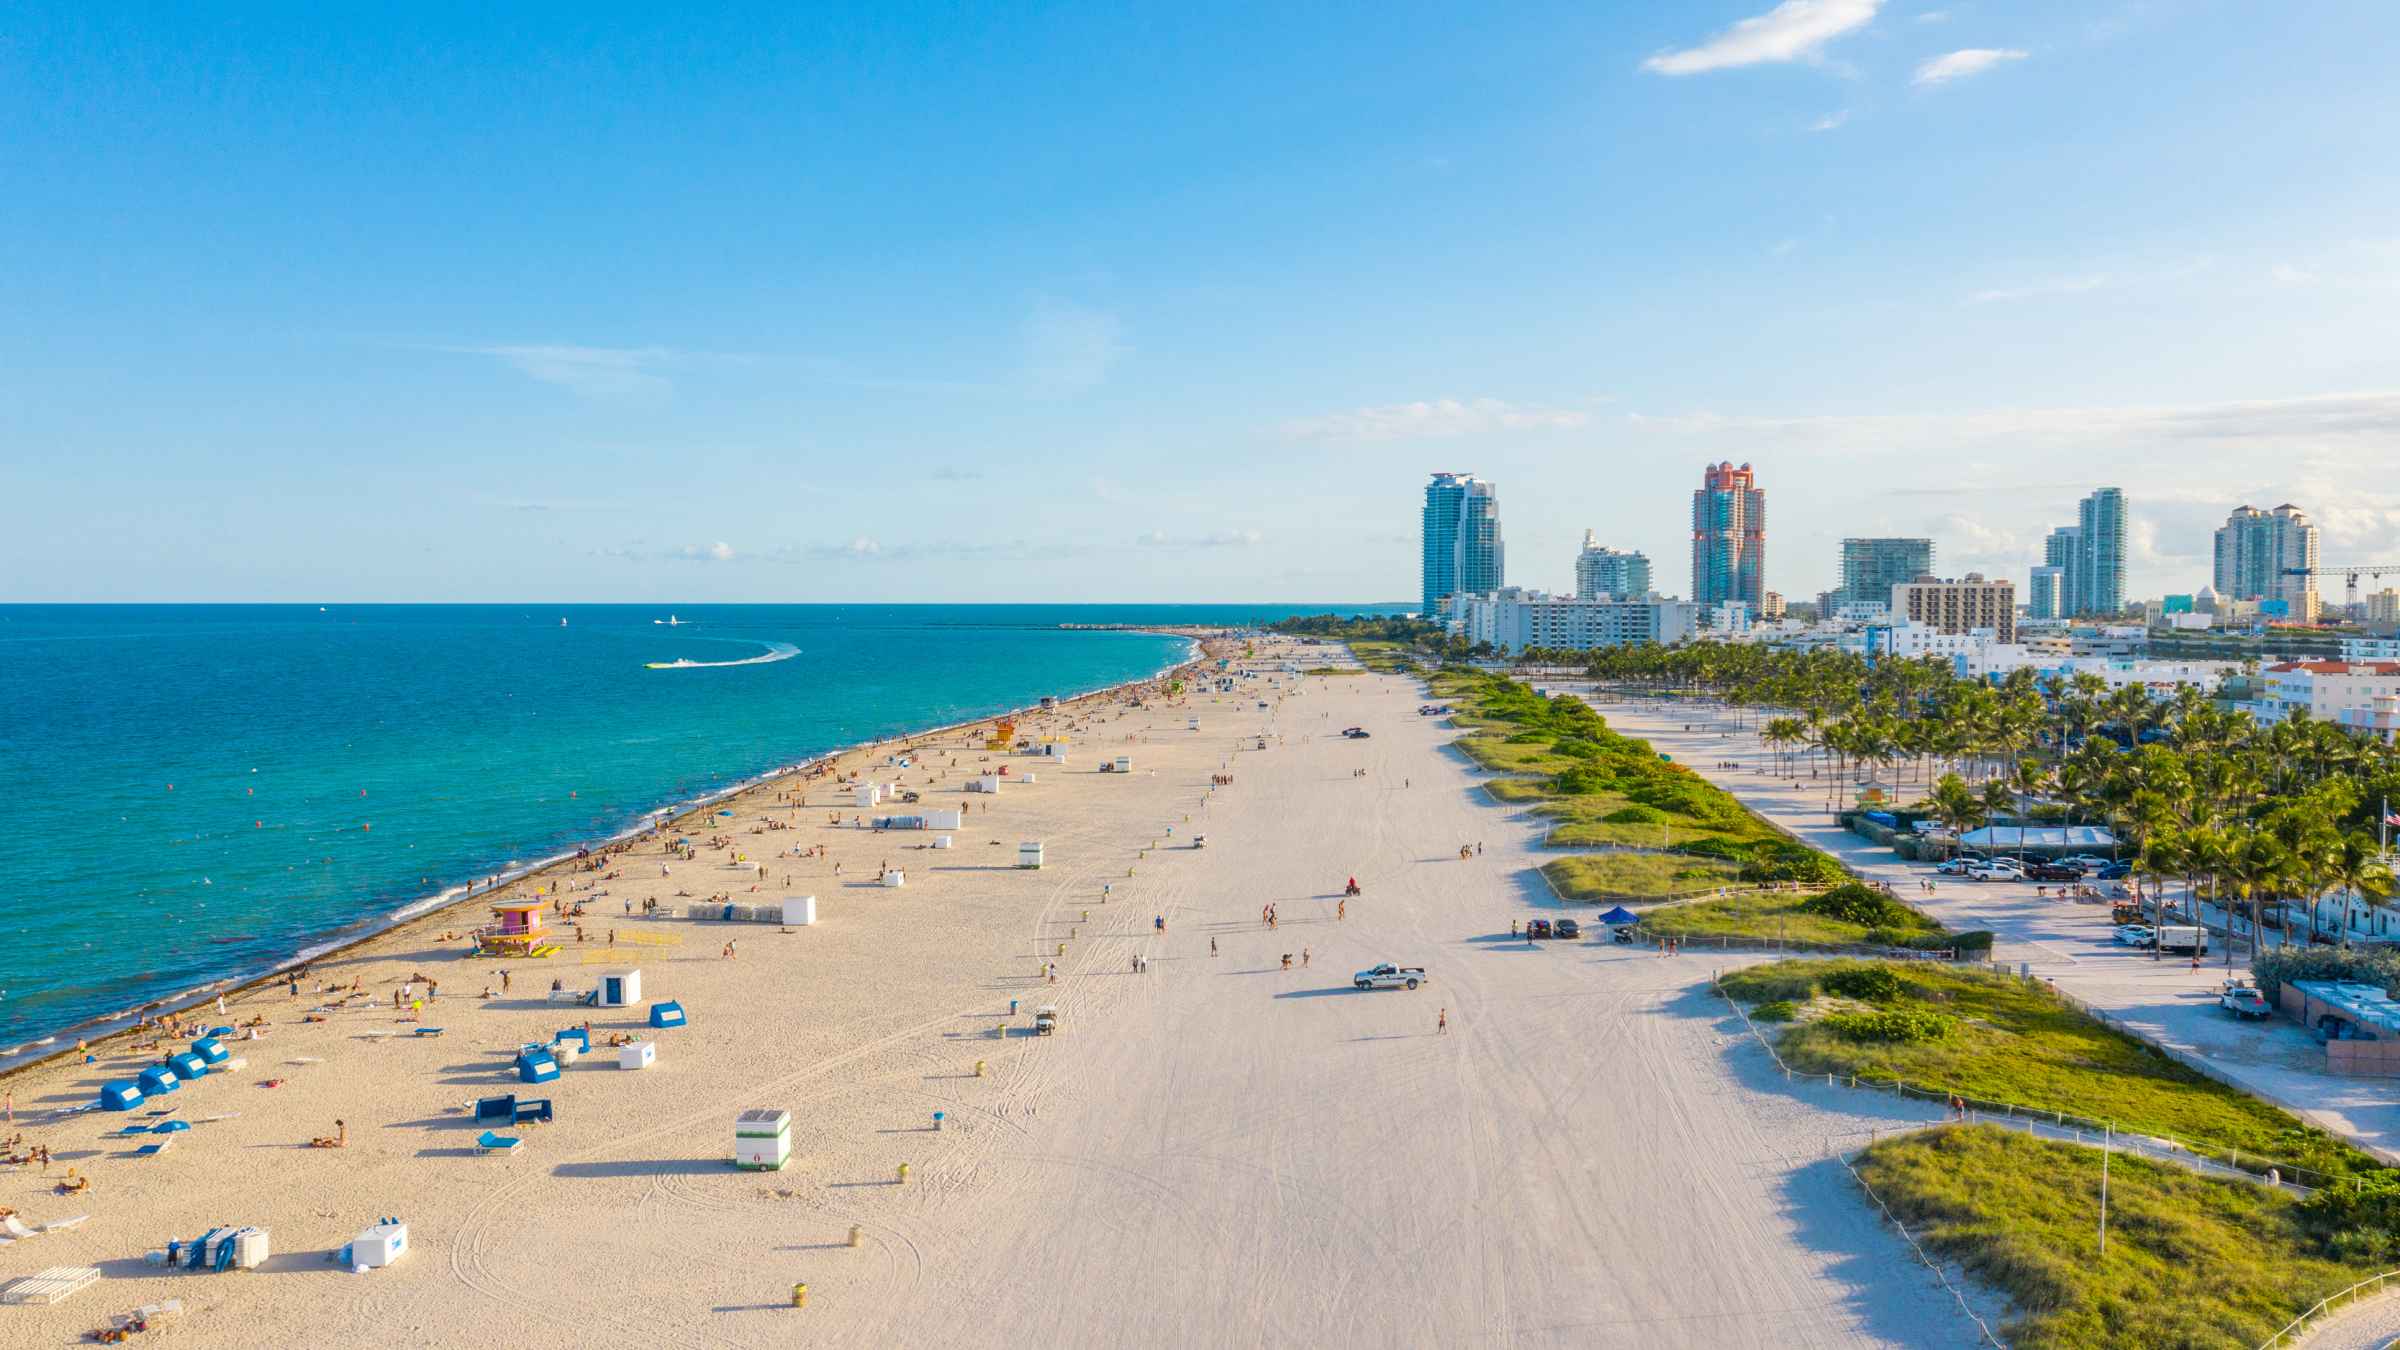 Florida 2021: Top 10 Tours & Activities (with Photos) - Things to Do in